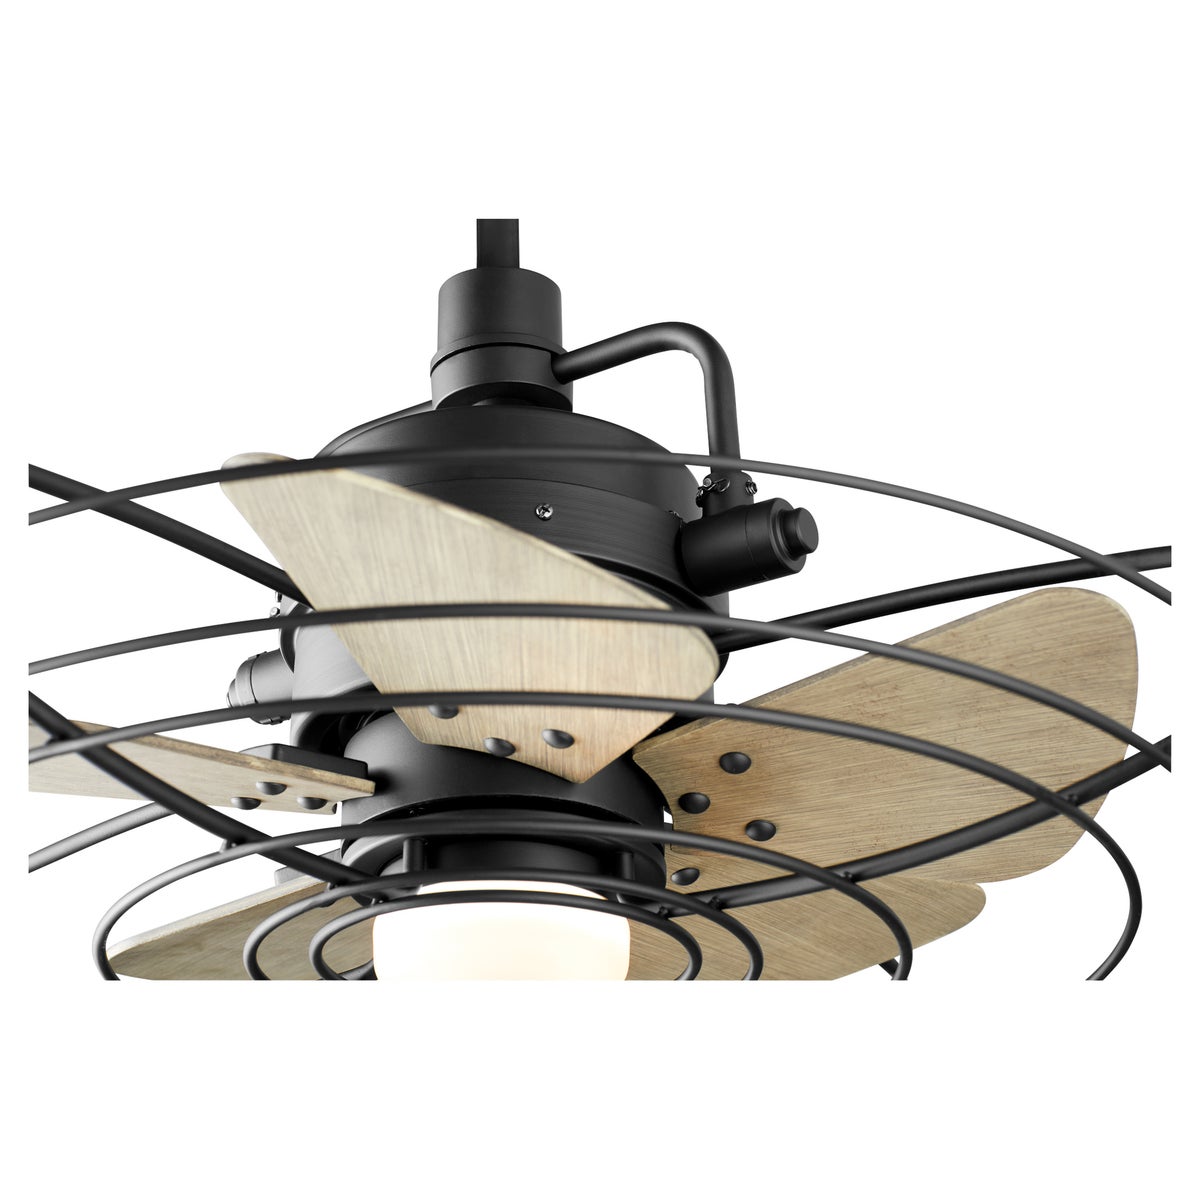 A modern twist on a classic design, this caged ceiling fan with light is perfect for small and mid-sized spaces. Damp-listed for outdoor covered areas. Elevate your space with this Quorum International 5-blade fan.